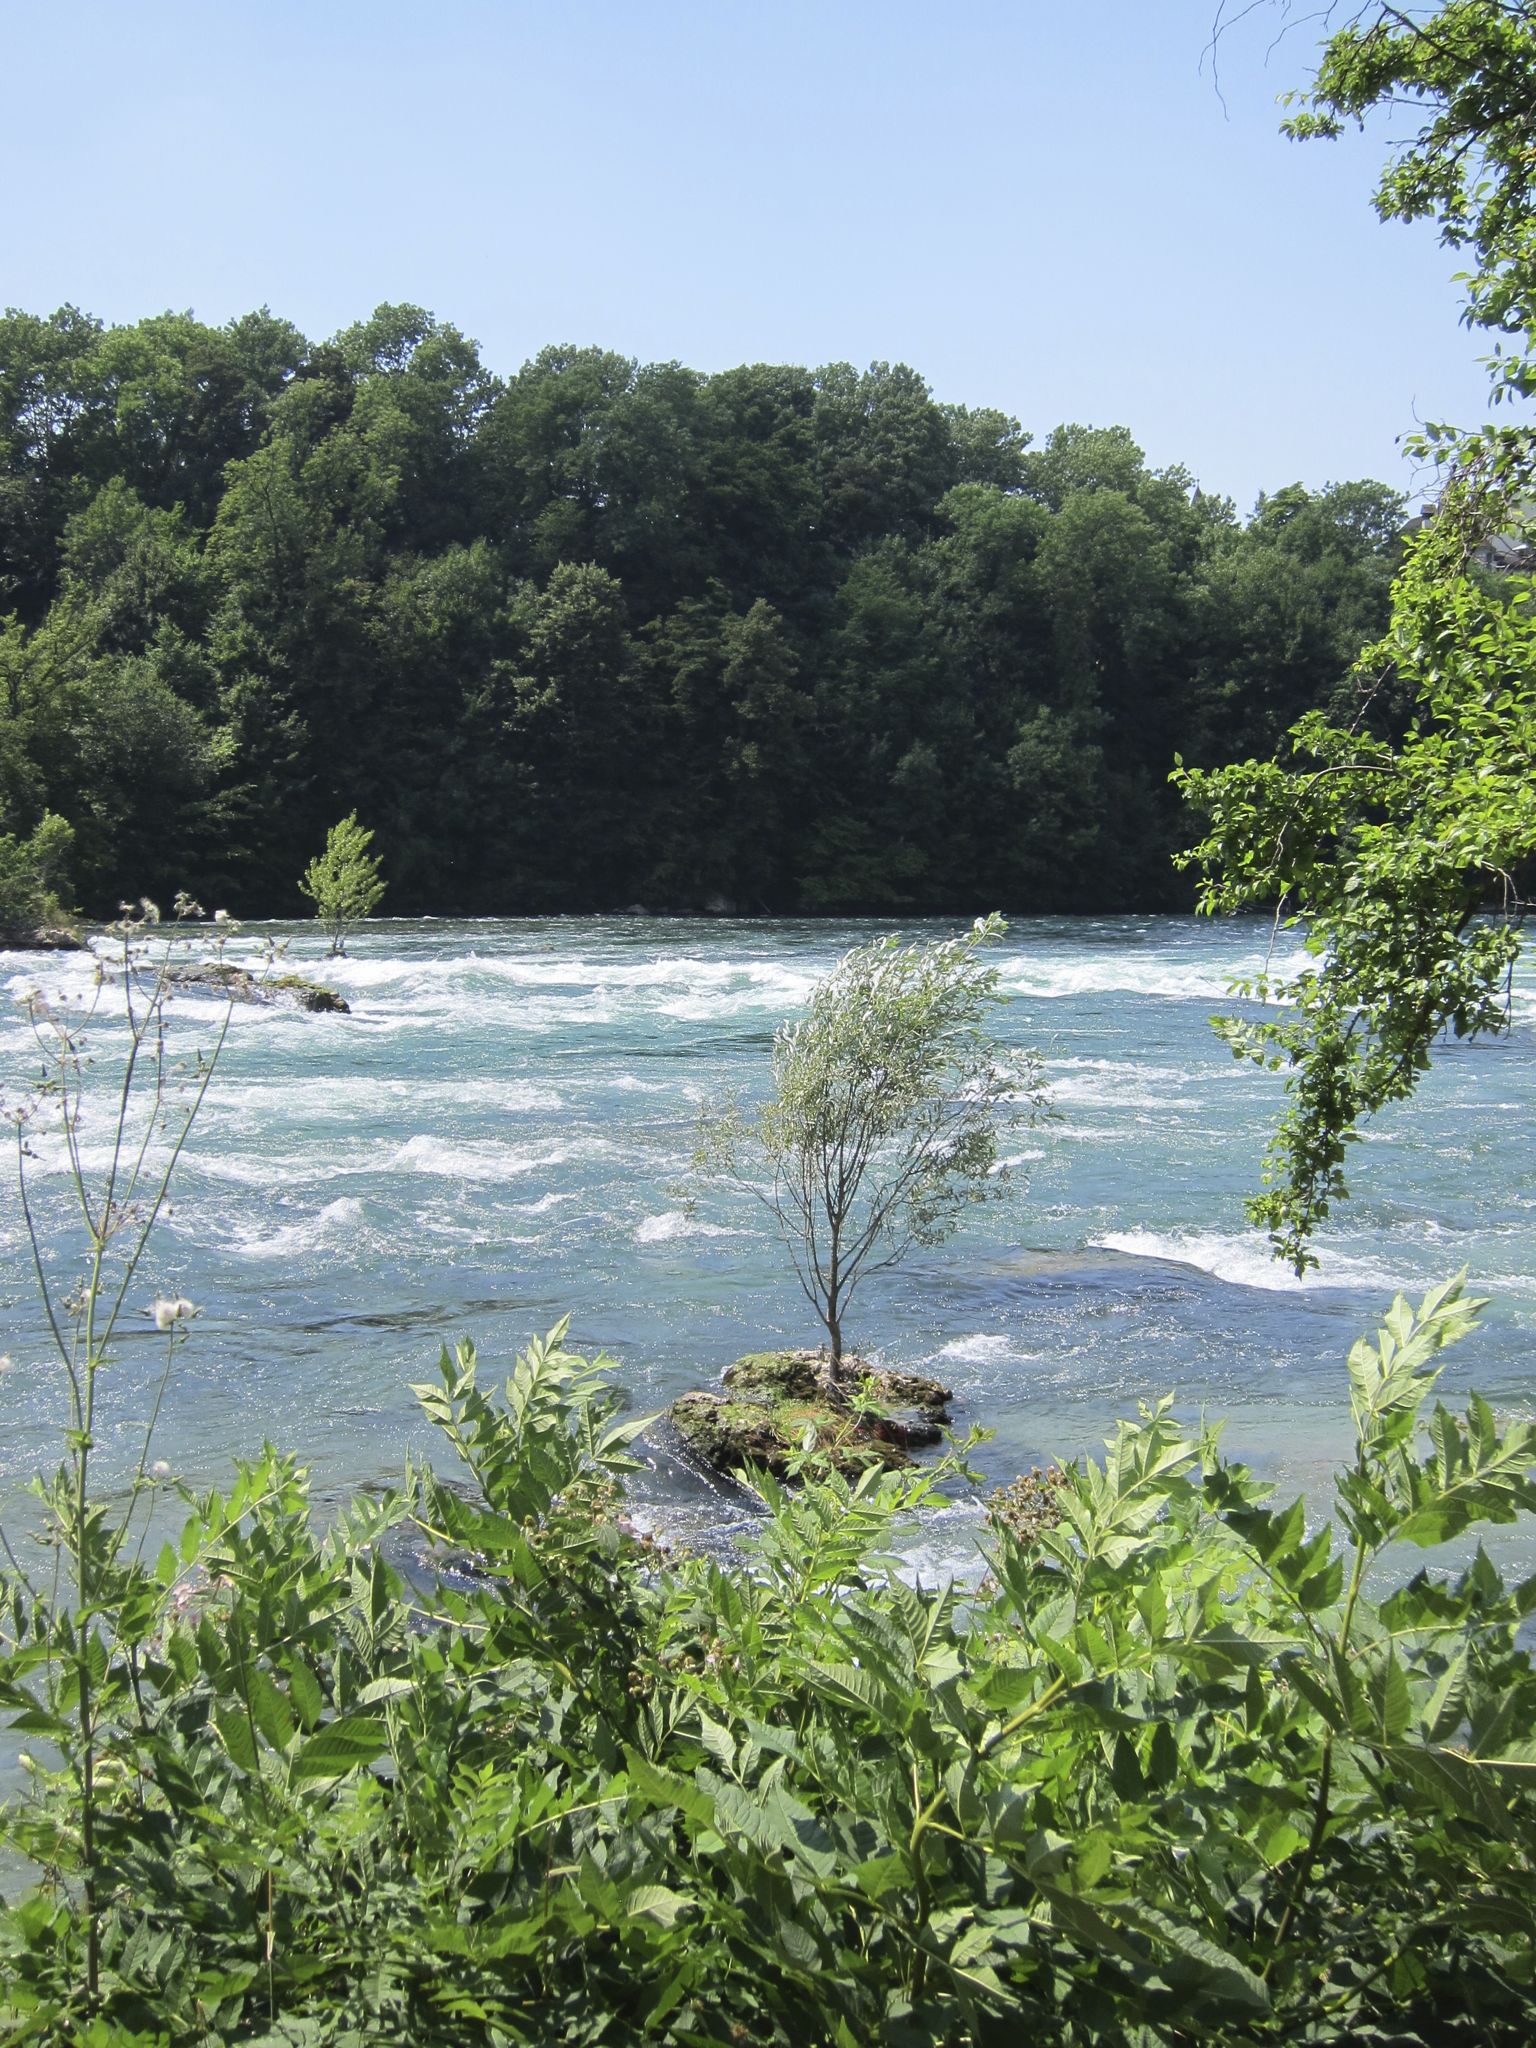 Photo 18 of 22 from the album Rheinfall.